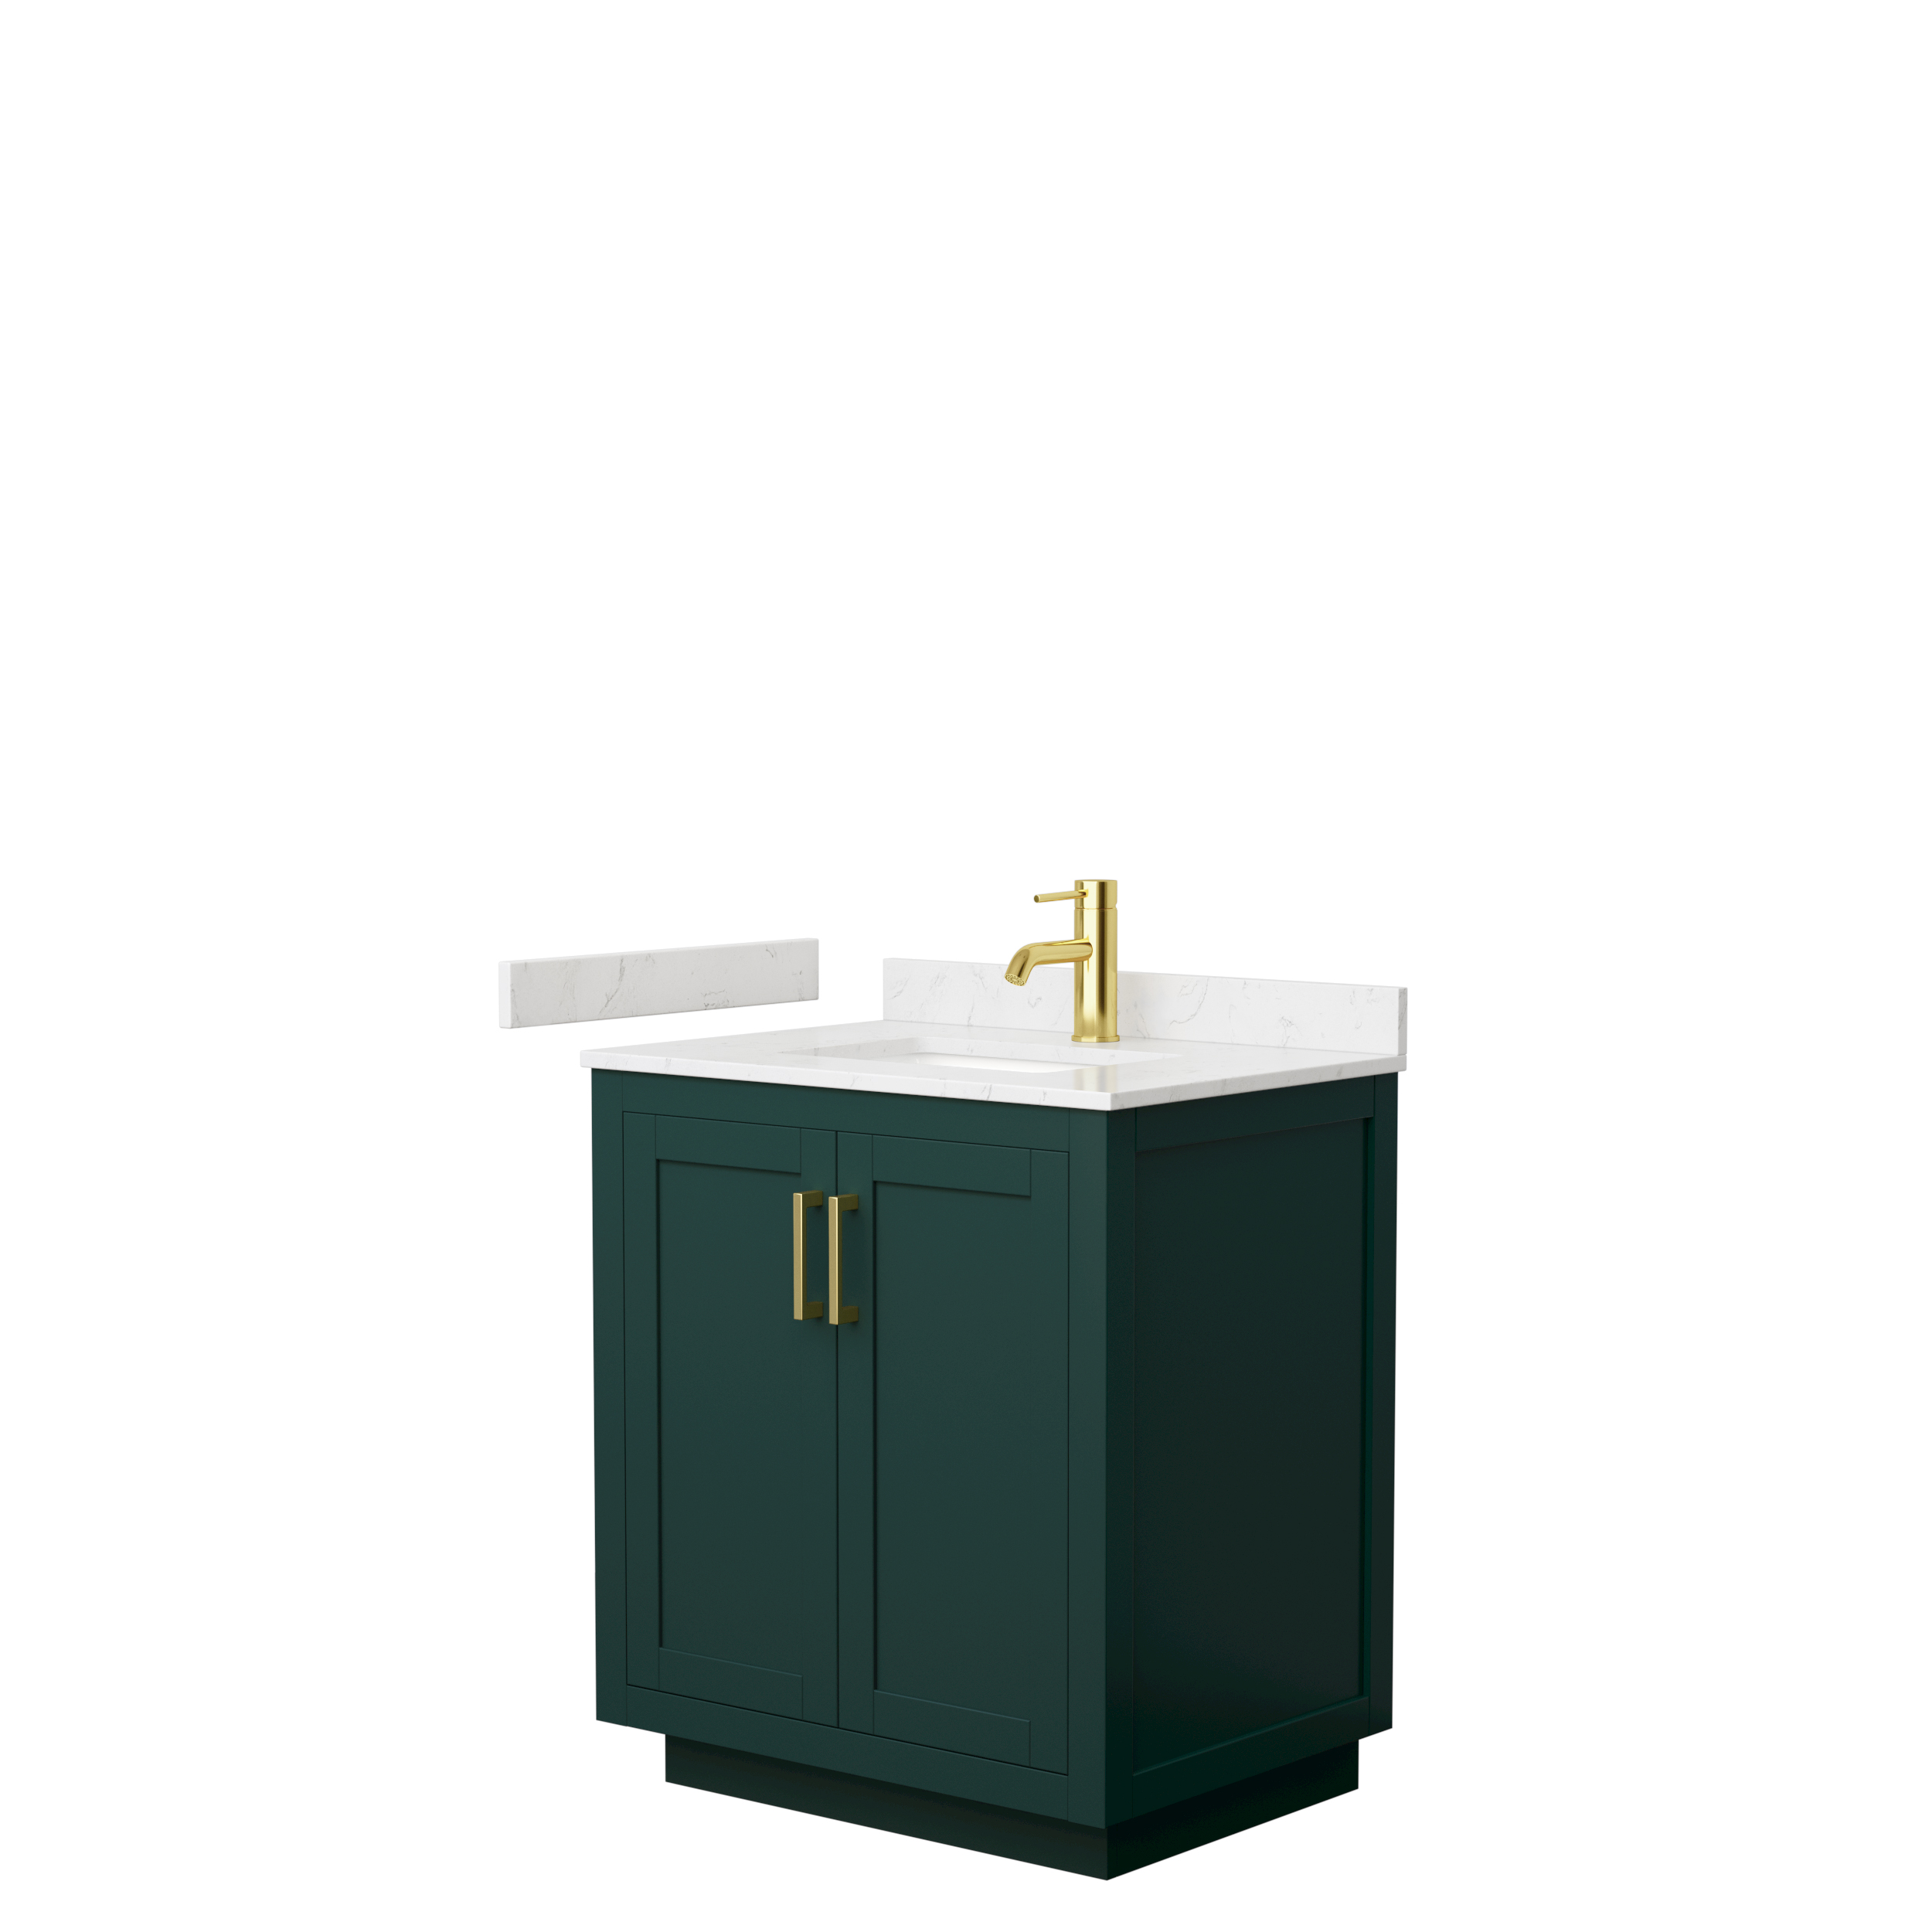 miranda 30" single vanity with optional cultured marble counter - green